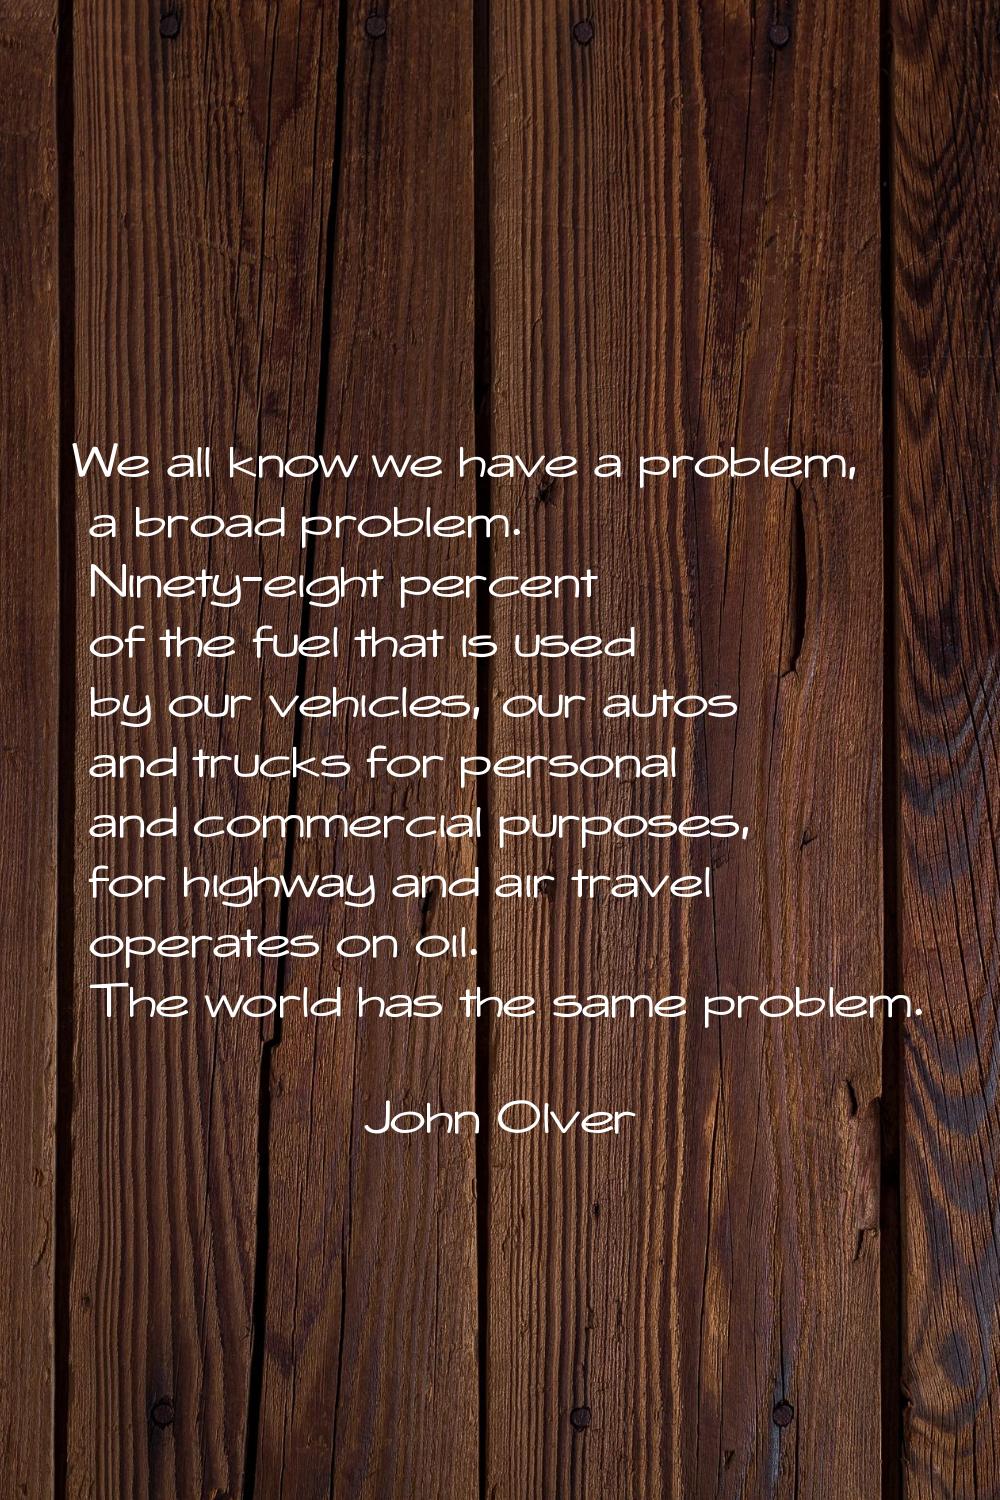 We all know we have a problem, a broad problem. Ninety-eight percent of the fuel that is used by ou